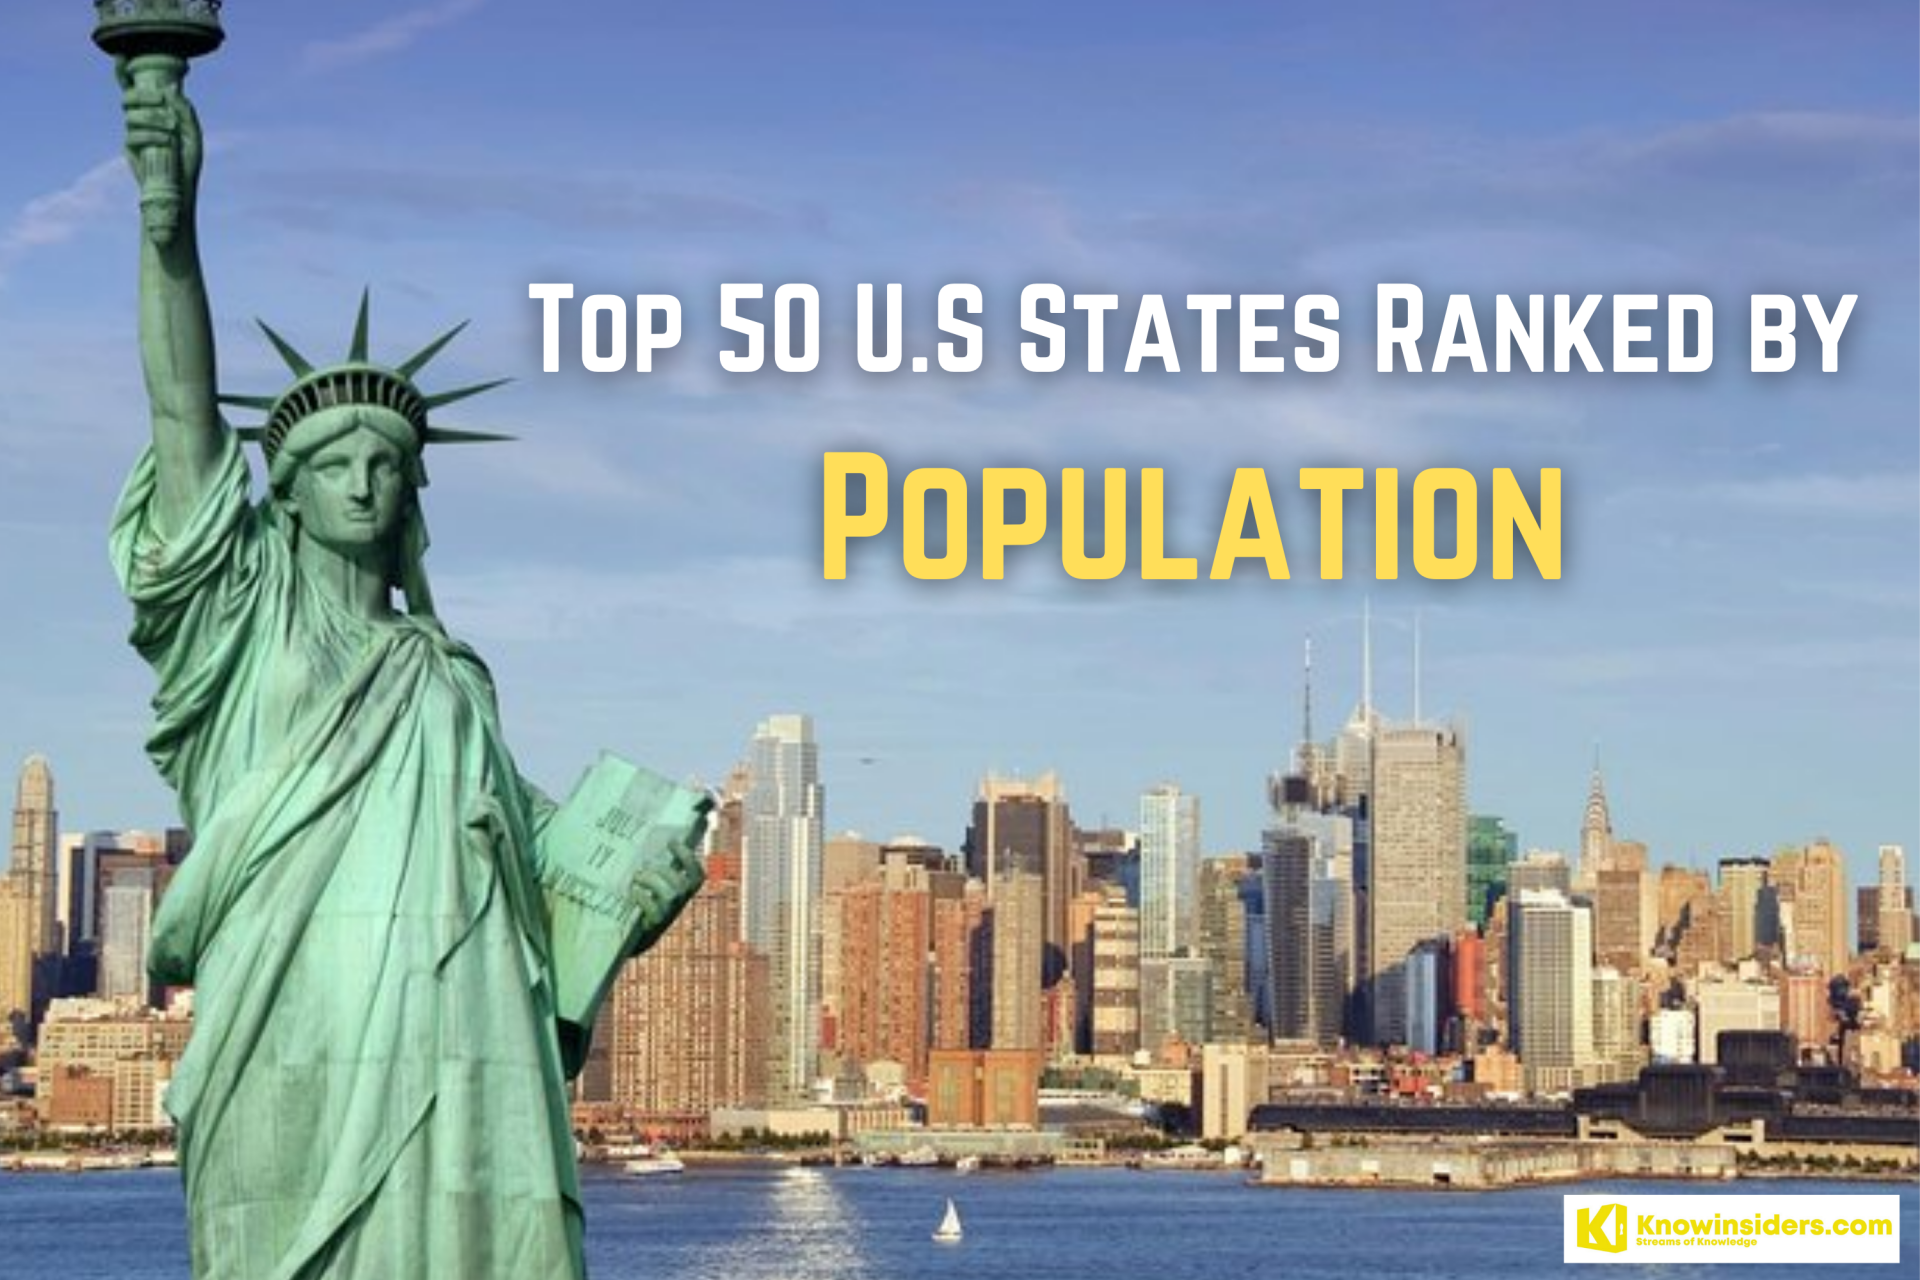 The 50 US States Ranked by Popuplation - The Largest and Smallest